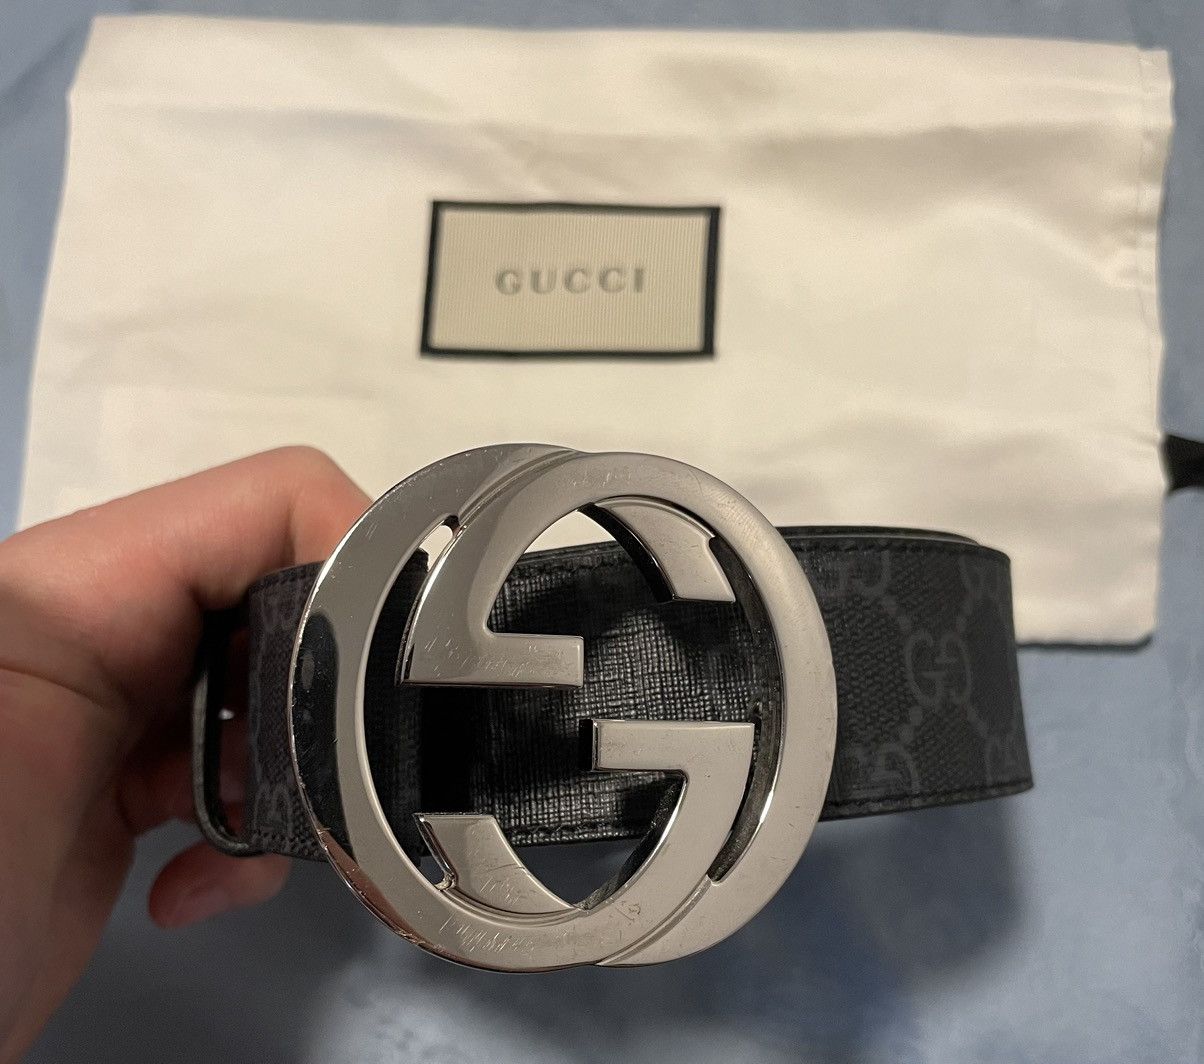 Gucci GG Supreme Belt with G buckle